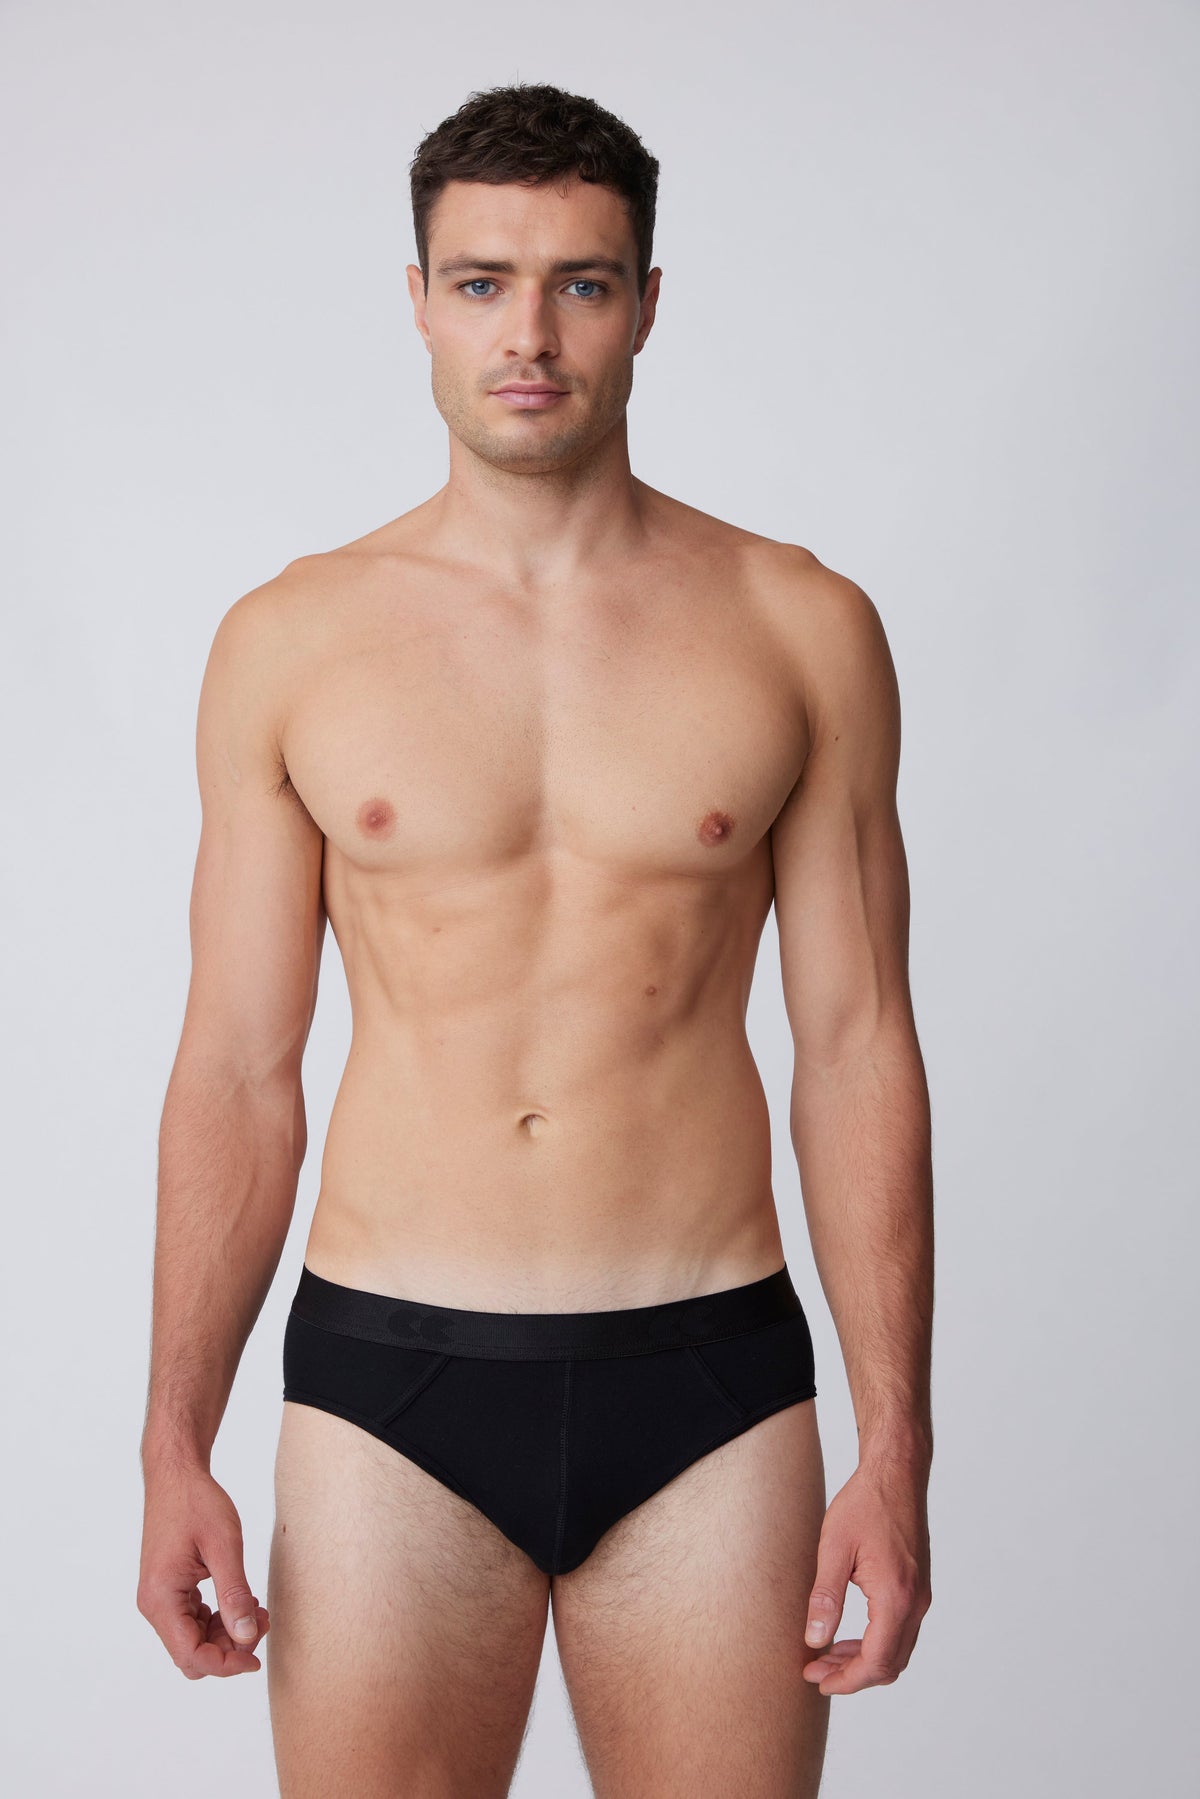 
            White, brunet male wearing only black brief